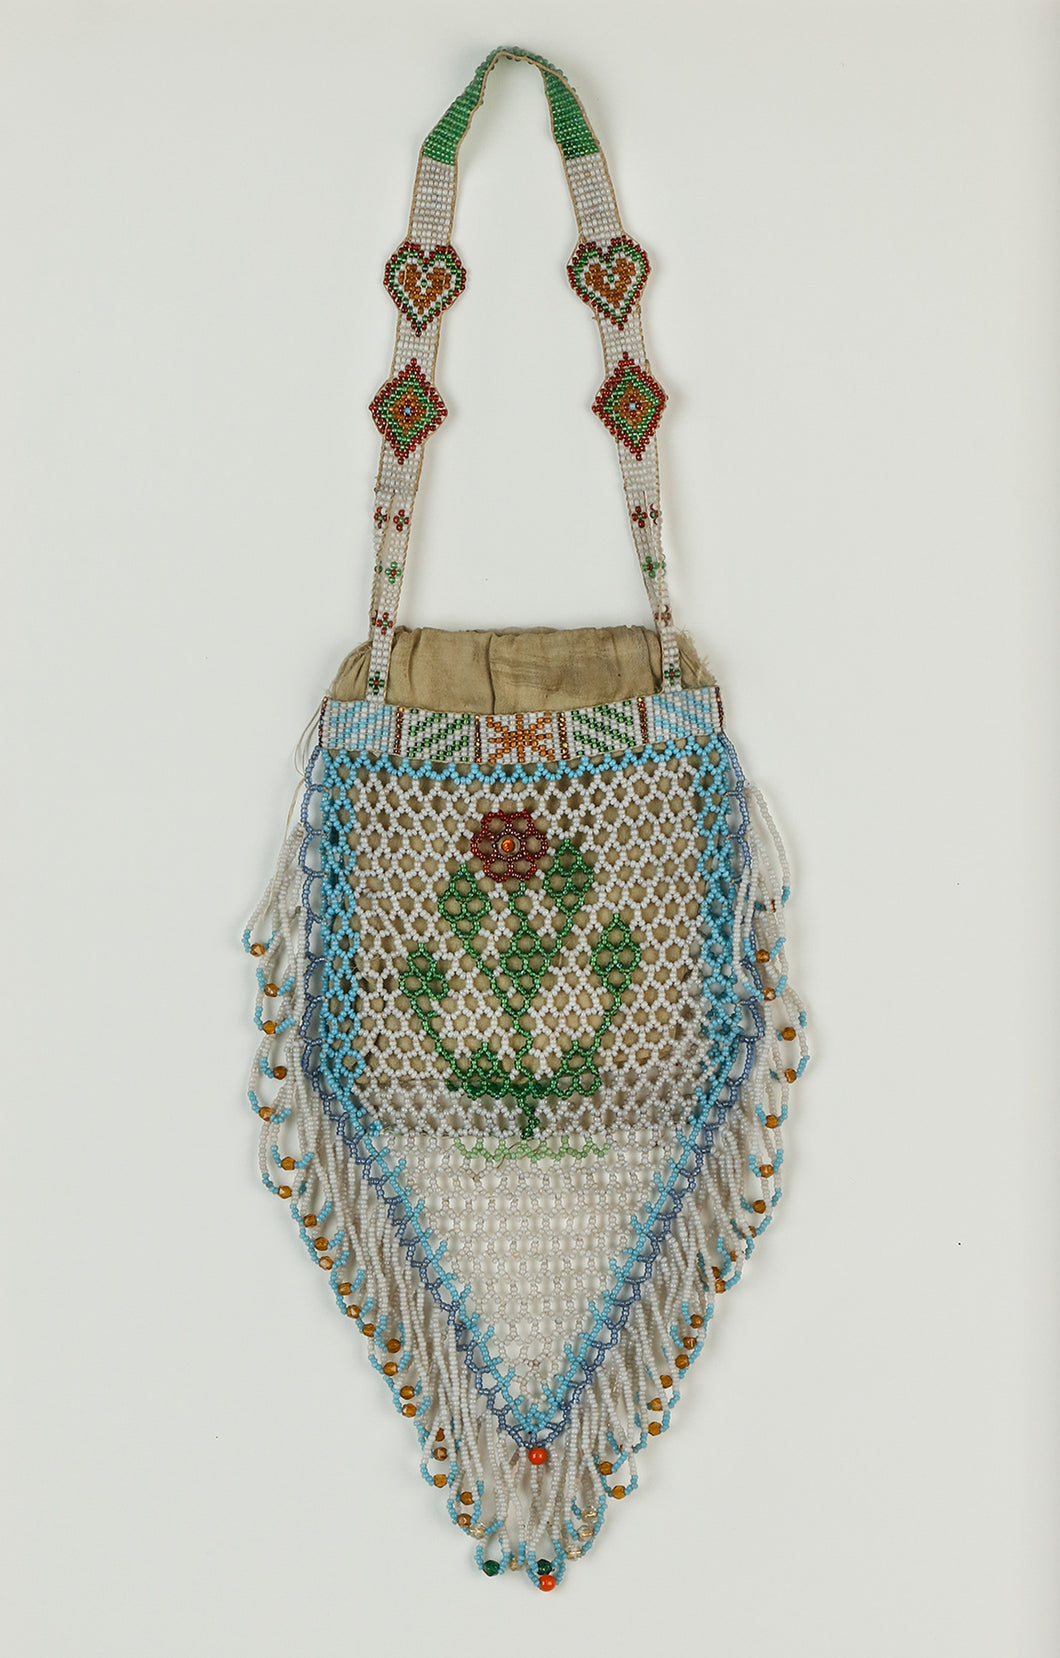 Columbia River Double Sided Beaded Purse c. 1900, Wishram